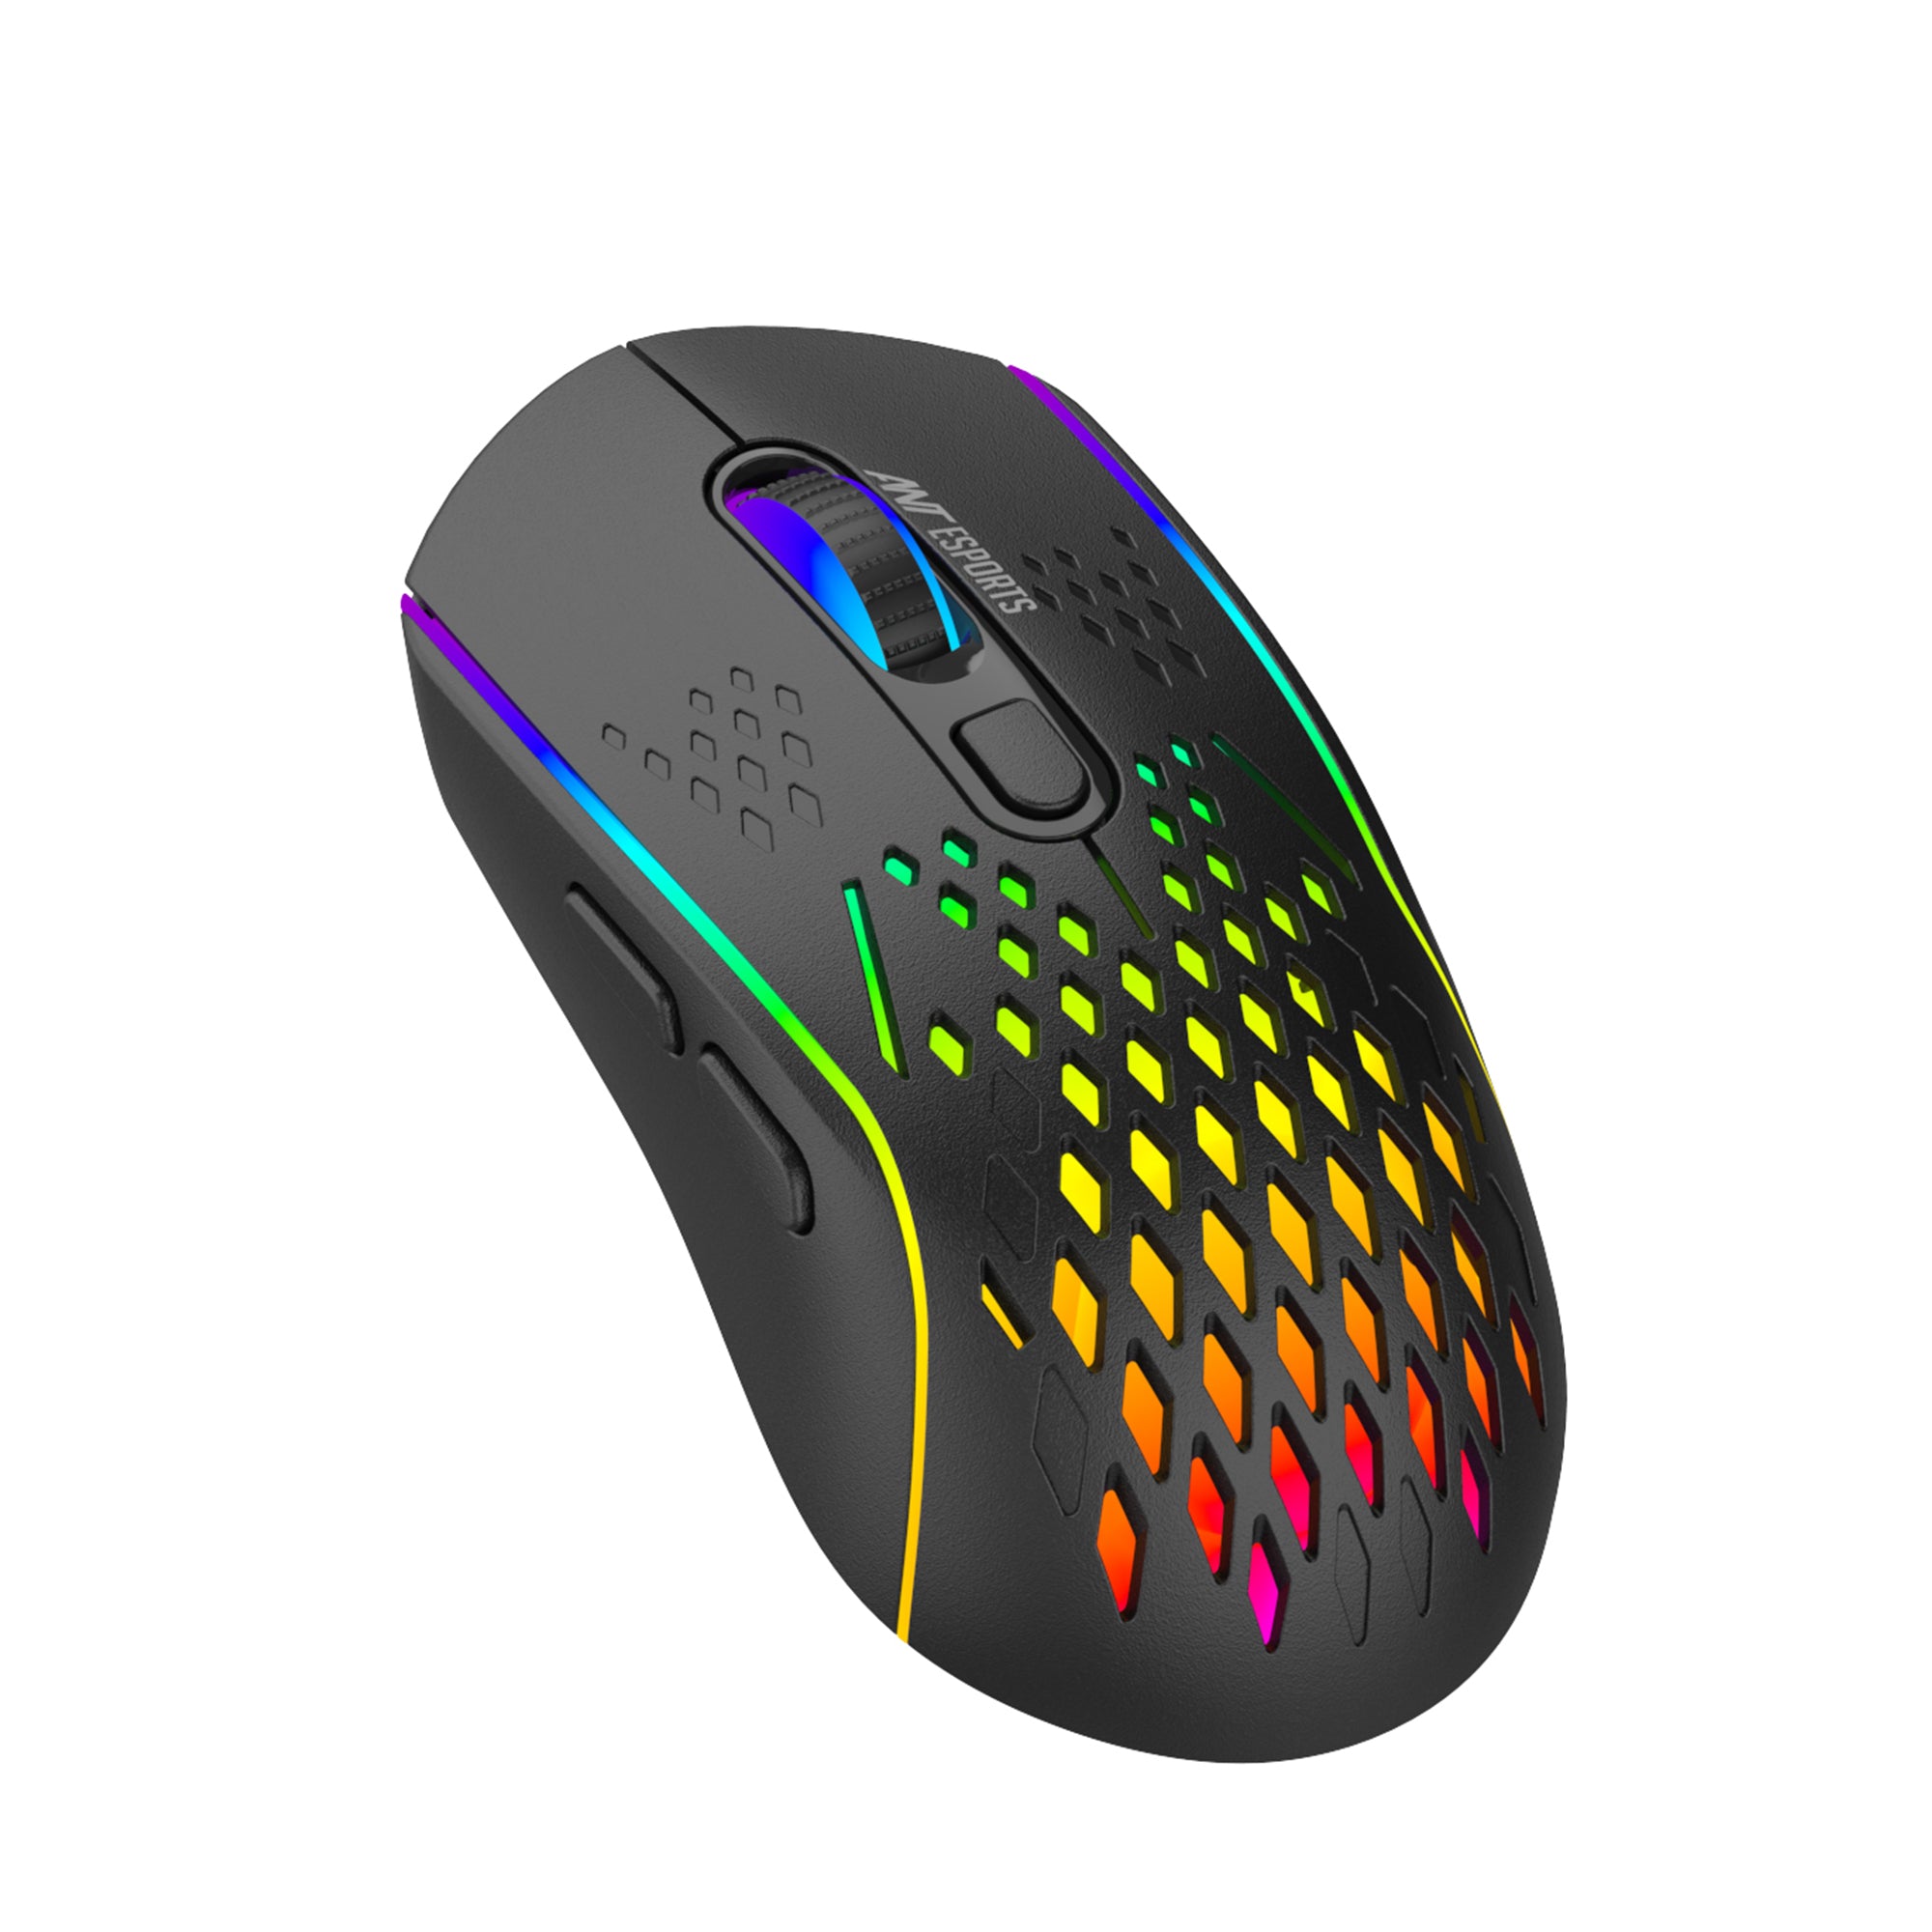 Buy Glorious Model O Wireless | Matte White | Gaming Mouse at Best Price in  India